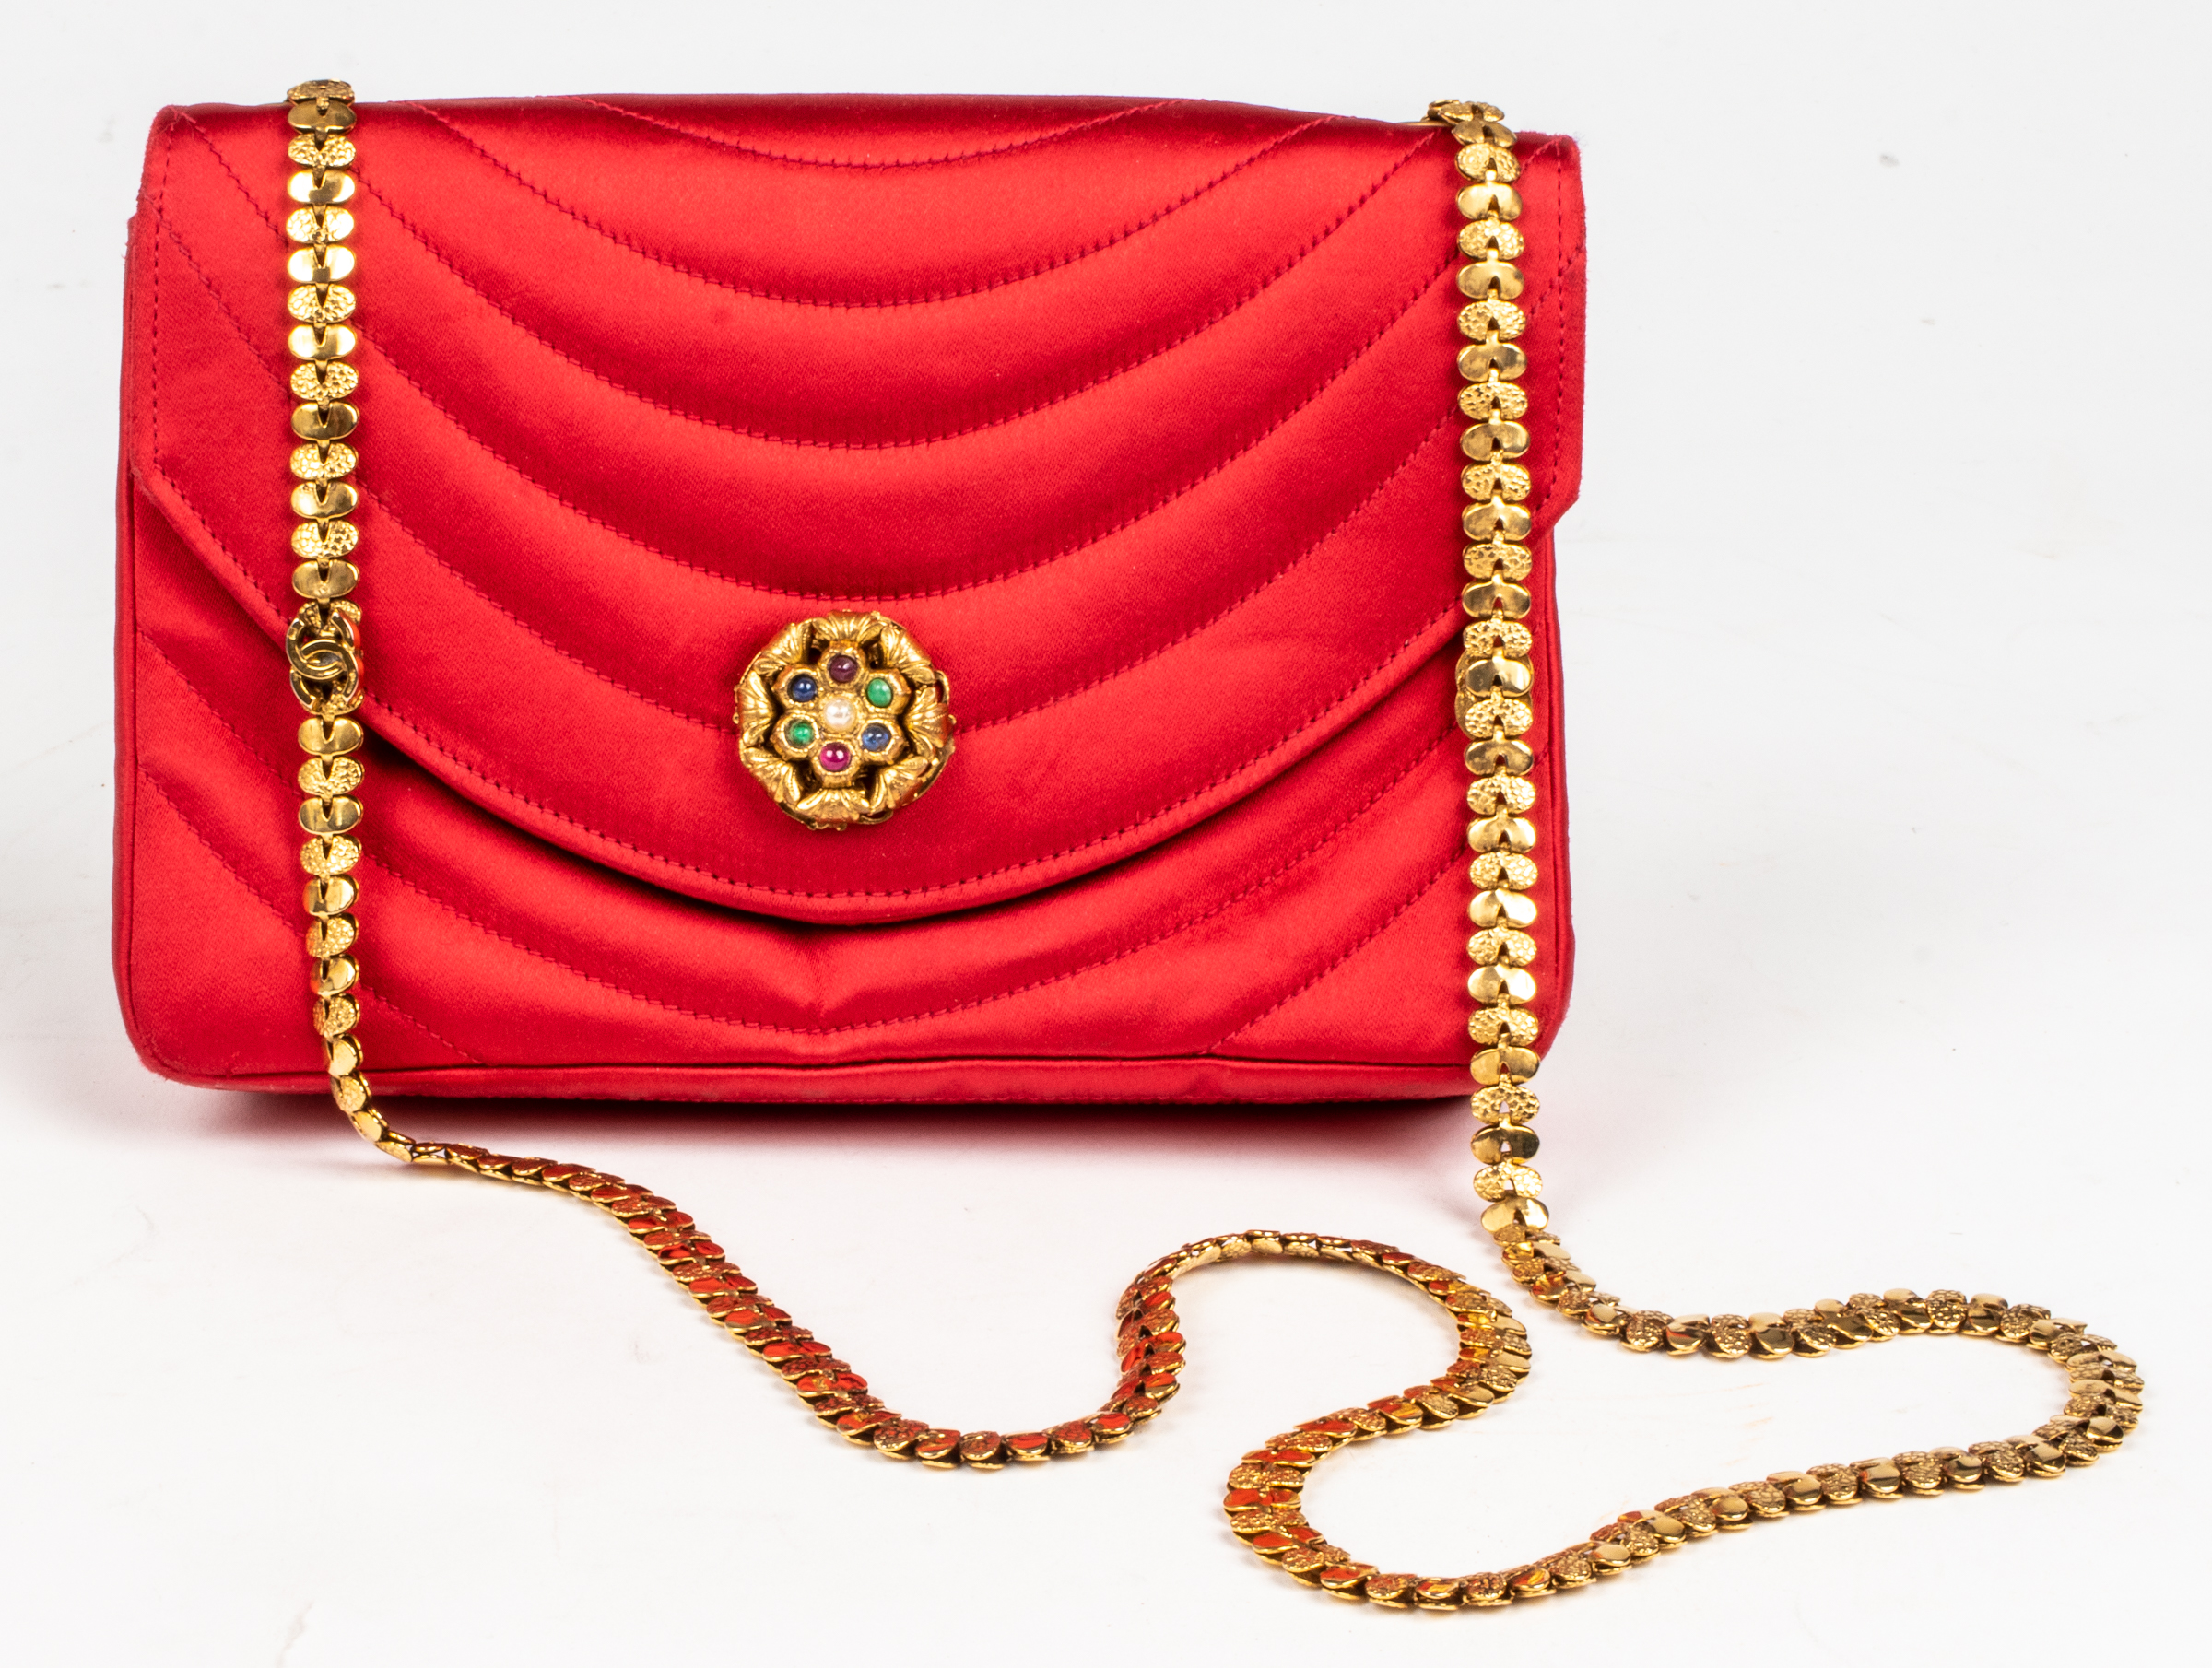 CHANEL QUILTED RED SATIN HANDBAG 3c3832